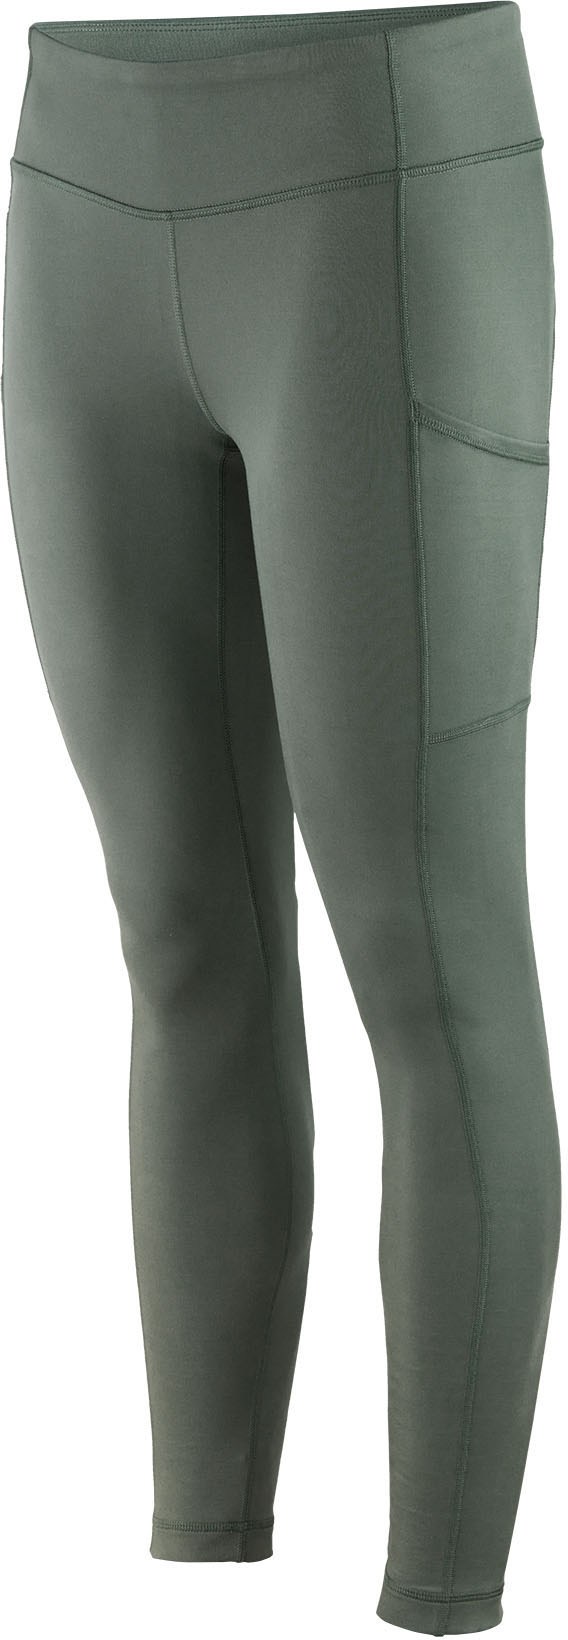 Patagonia Maipo 7/8 Tights - Women's, REI Co-op